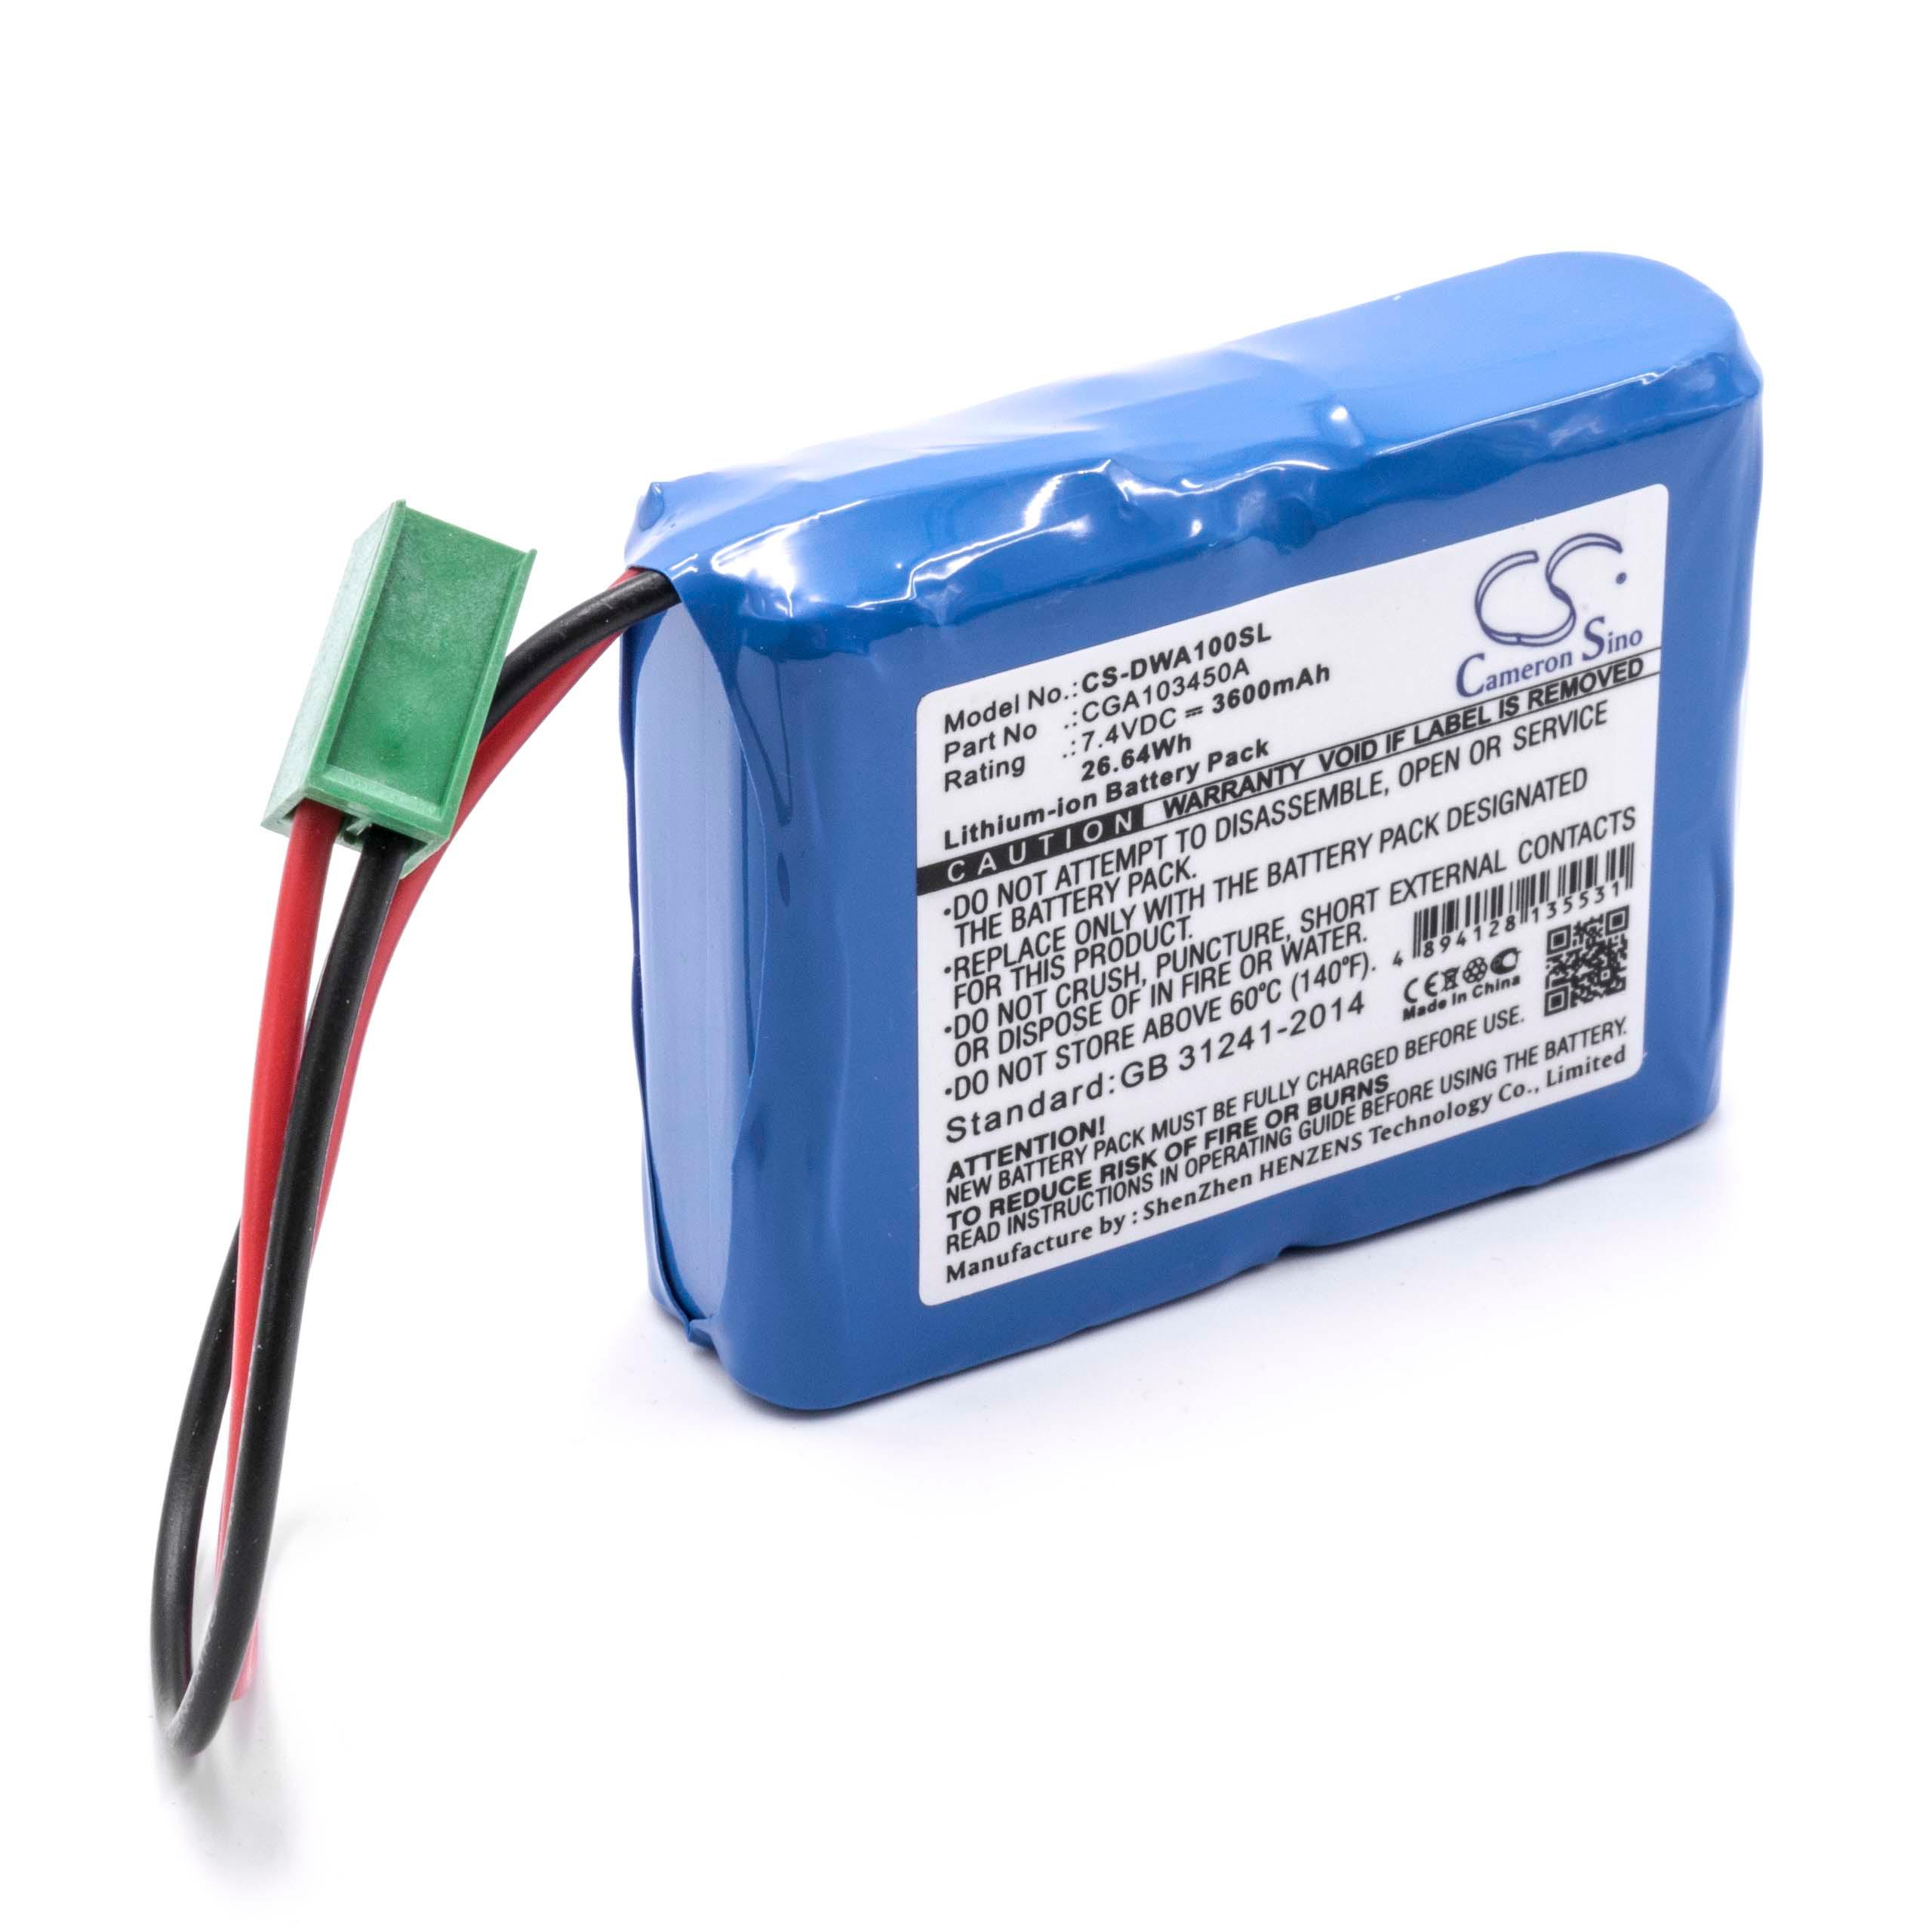 Alignment Tool Battery Replacement for CEMB CGA103450A - 3600mAh 7.4V Li-Ion